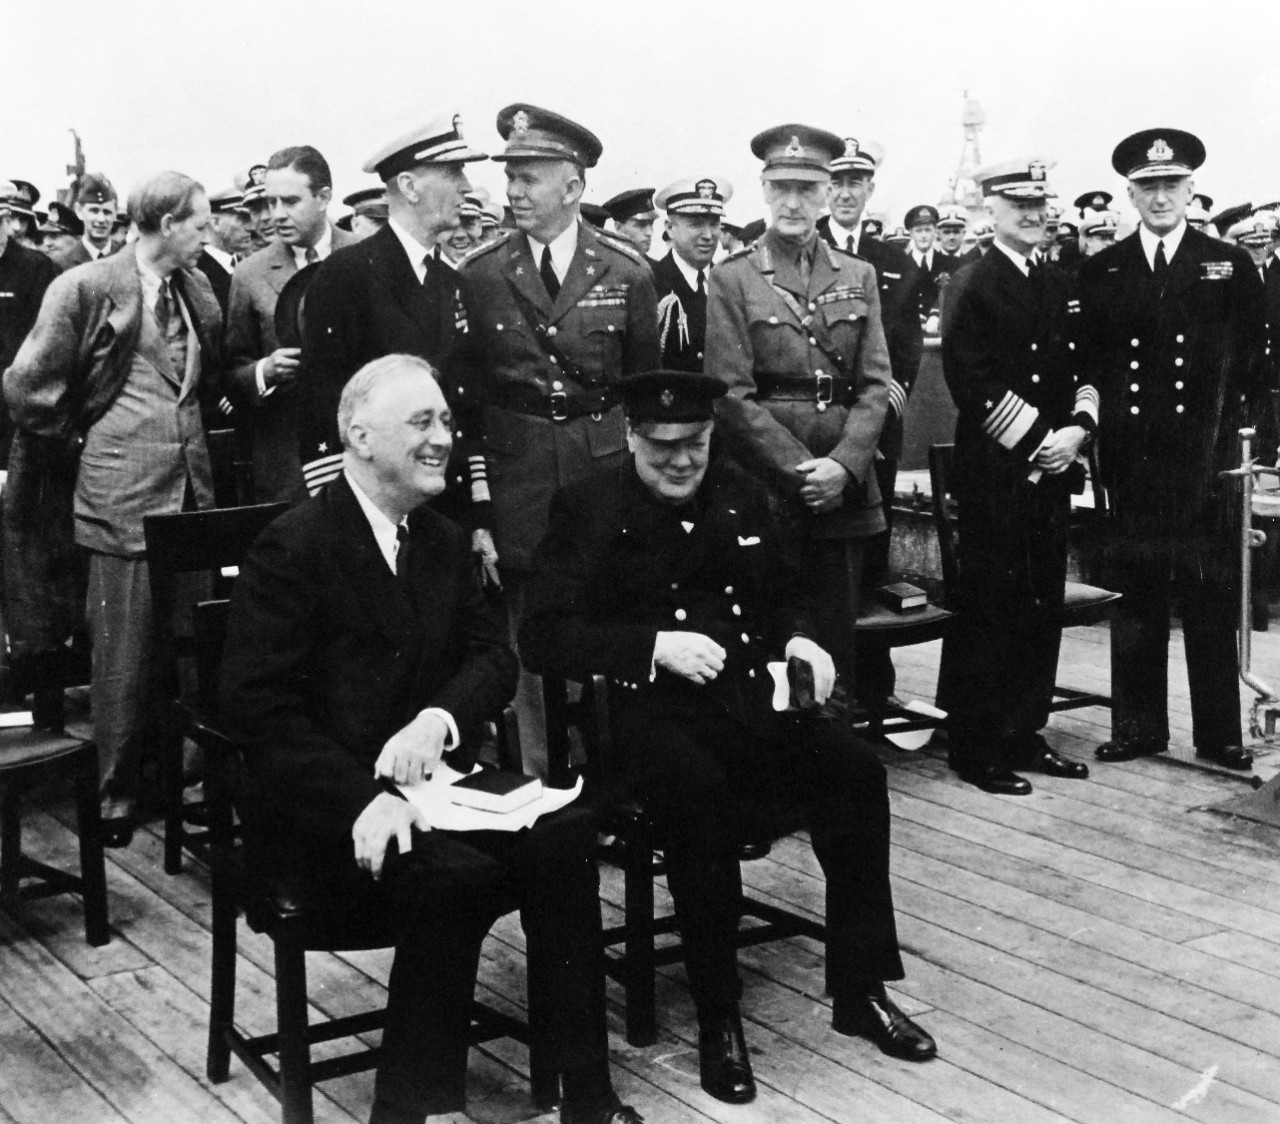 80-G-26854: Atlantic Charter, August 1941.  President Franklin D. Roosevelt and Prime Minister Winston S. Churchill and high-ranking naval and military men of both nations following divine services onboard Royal Navy battleship HMS Prince of Wales during the Atlantic Charter.  Standing left to right:  Harry Hopkins; Averill H. Harriman; Admiral Ernest J. King; General George C. Marshall; Rear Admiral Ross T. McIntire; General Sir John Dill; Captain John R. Beardall; Admiral Harold R. Stark; Admiral Sir Dudley Pound.  Photograph released August 10, 1941.  Official U.S. Navy Photograph, now in the collections of the National Archives.  (2016/03/22).